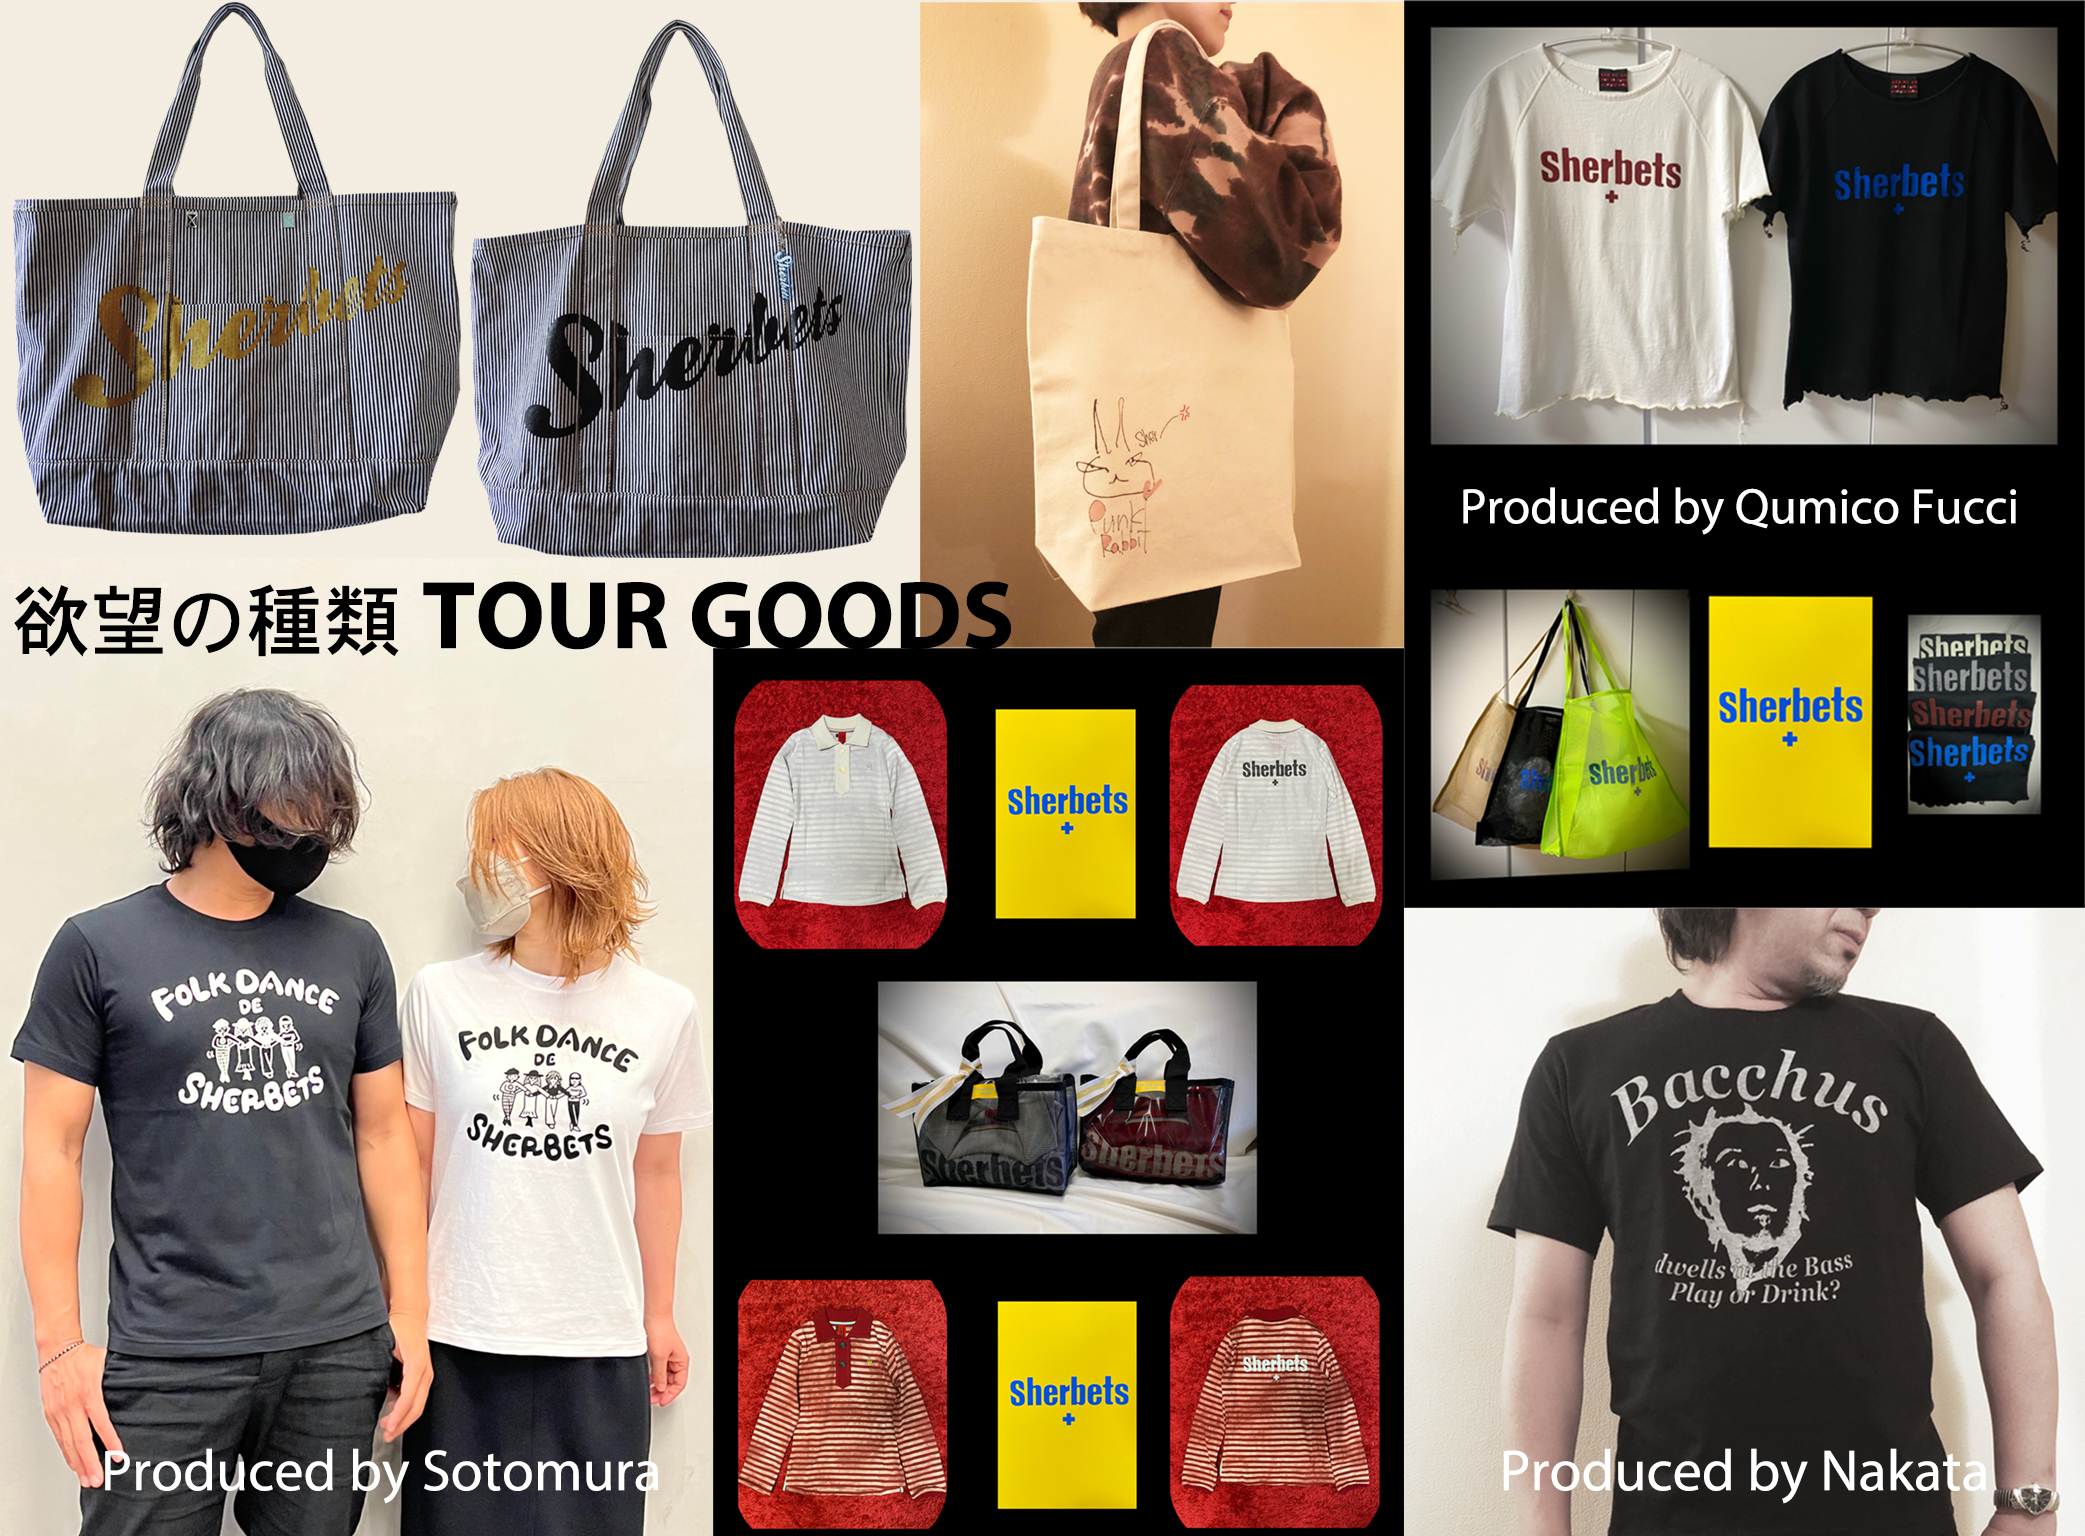 Sherbets 欲望の種類 TOUR GOODS を発売開始！ 〜 浅井健一|SEXY 